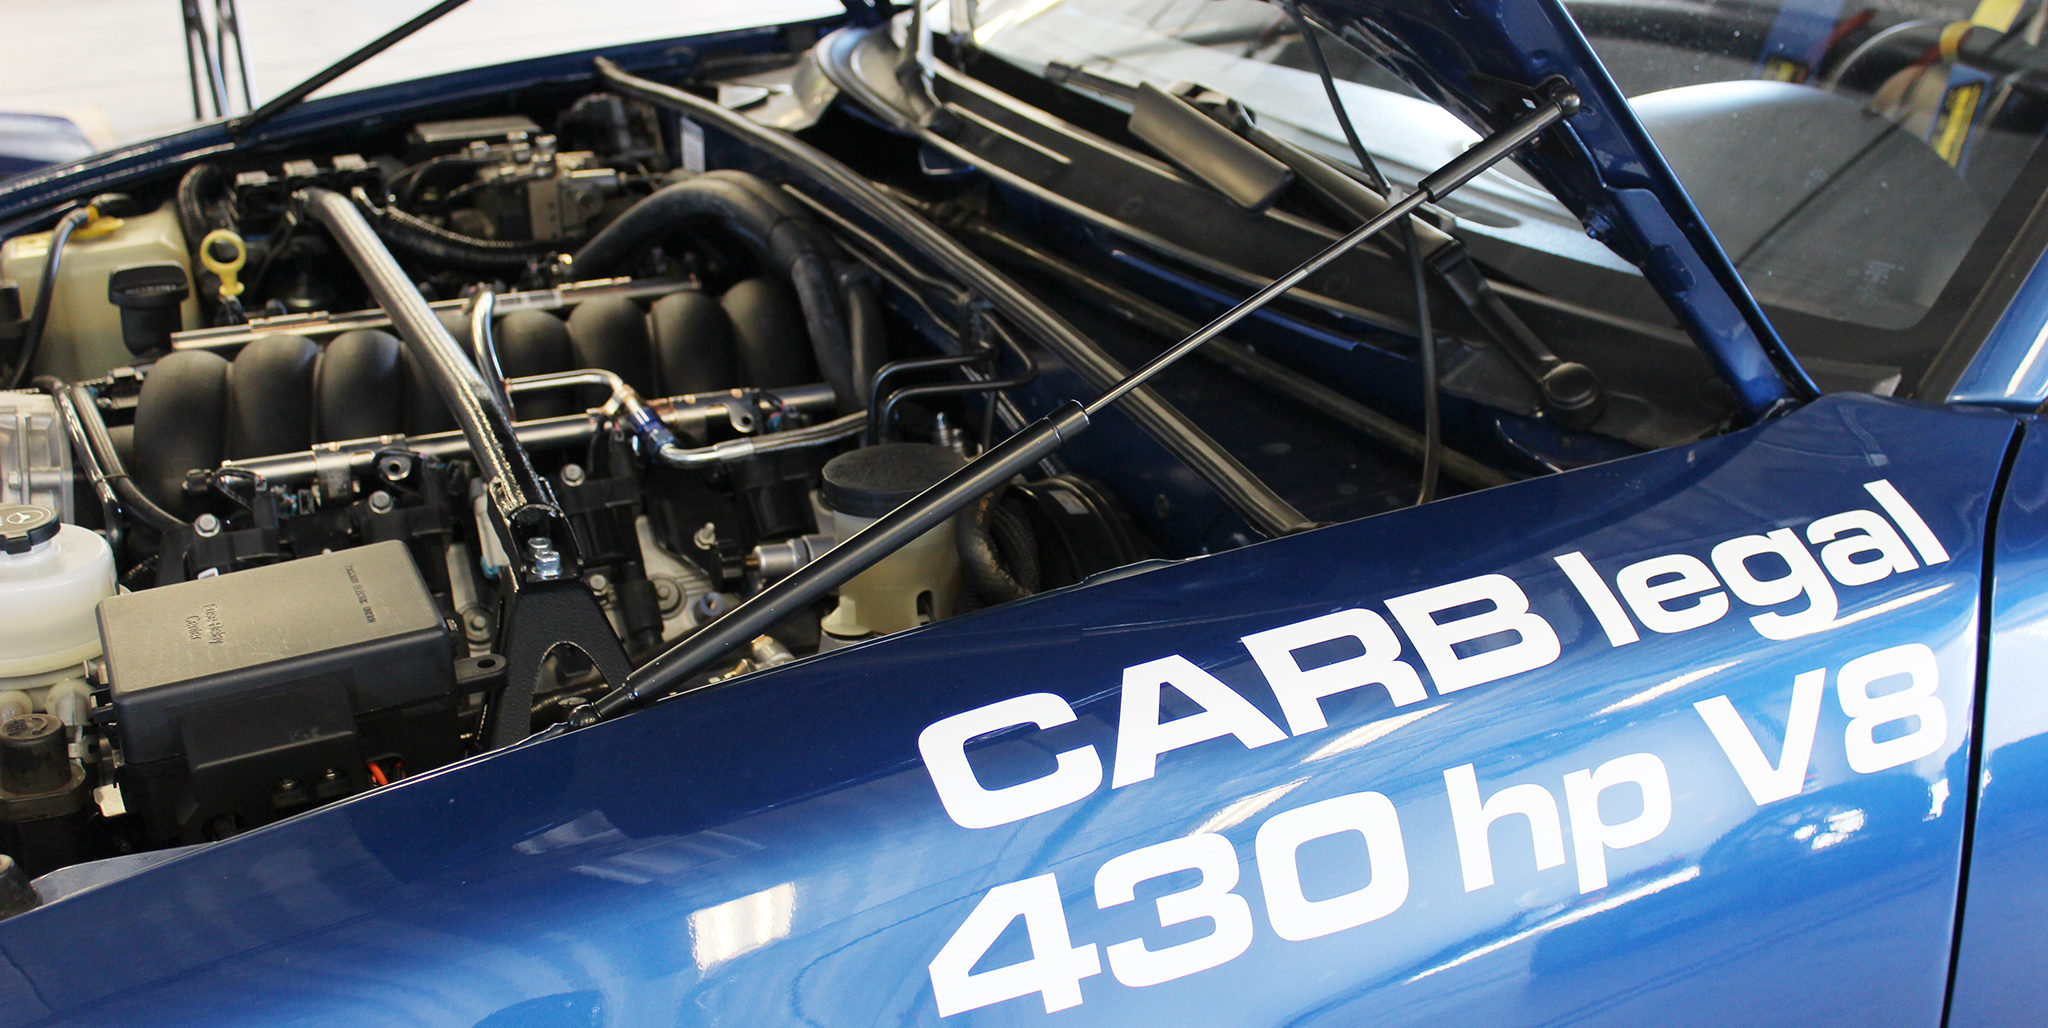 This is the World's First CARBLegal V8 Miata Swap